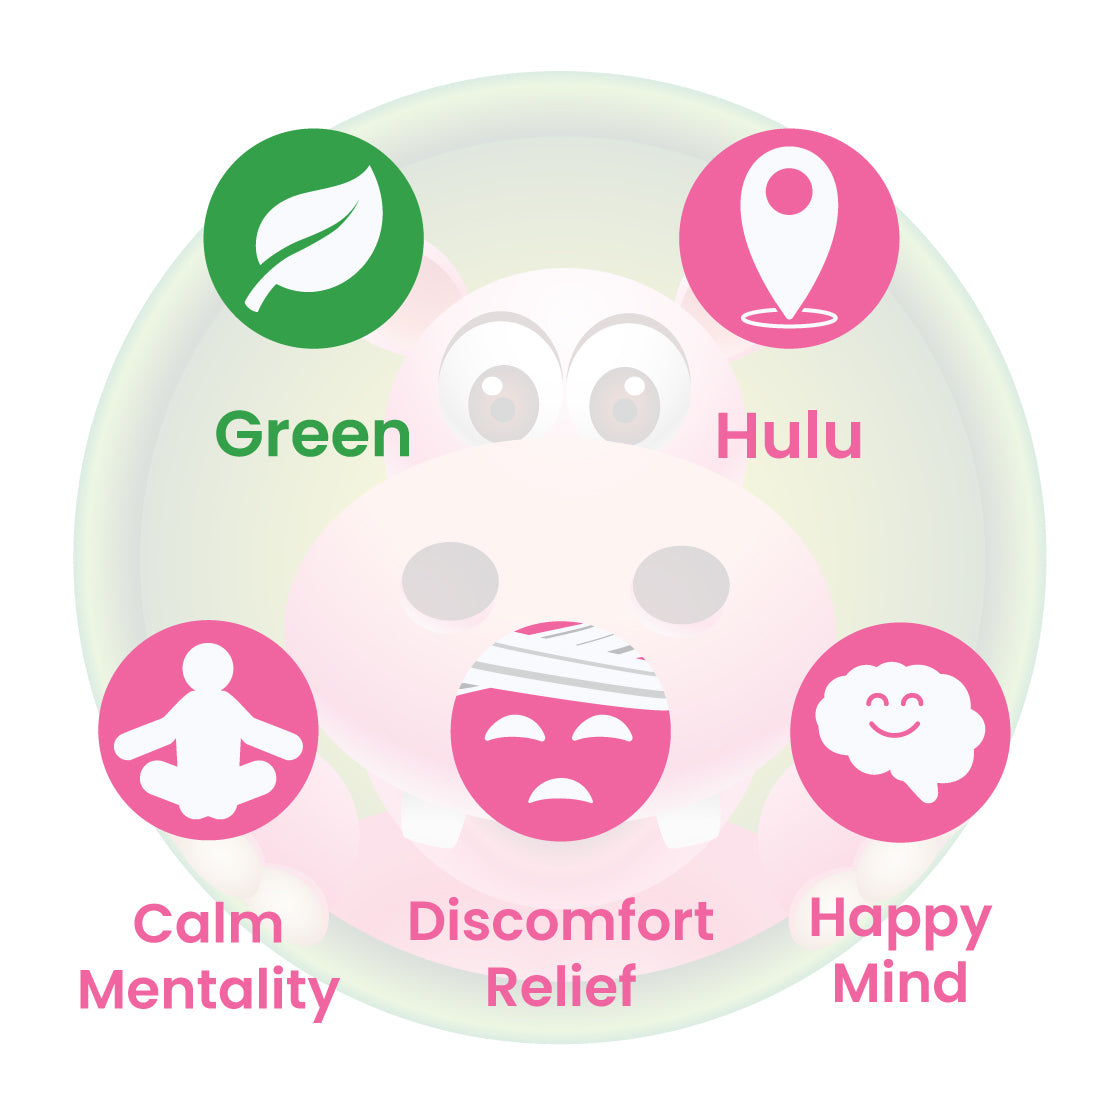 Infographic Details for Happy Hippo Green Vein Hulu Kratom Powder. Leaf color: Green Vein. Kratom Strain Origin: Hulu. Kratom Effects resonate with Calm Mentality, Happy Mind, and Relief from Physical Discomfort.